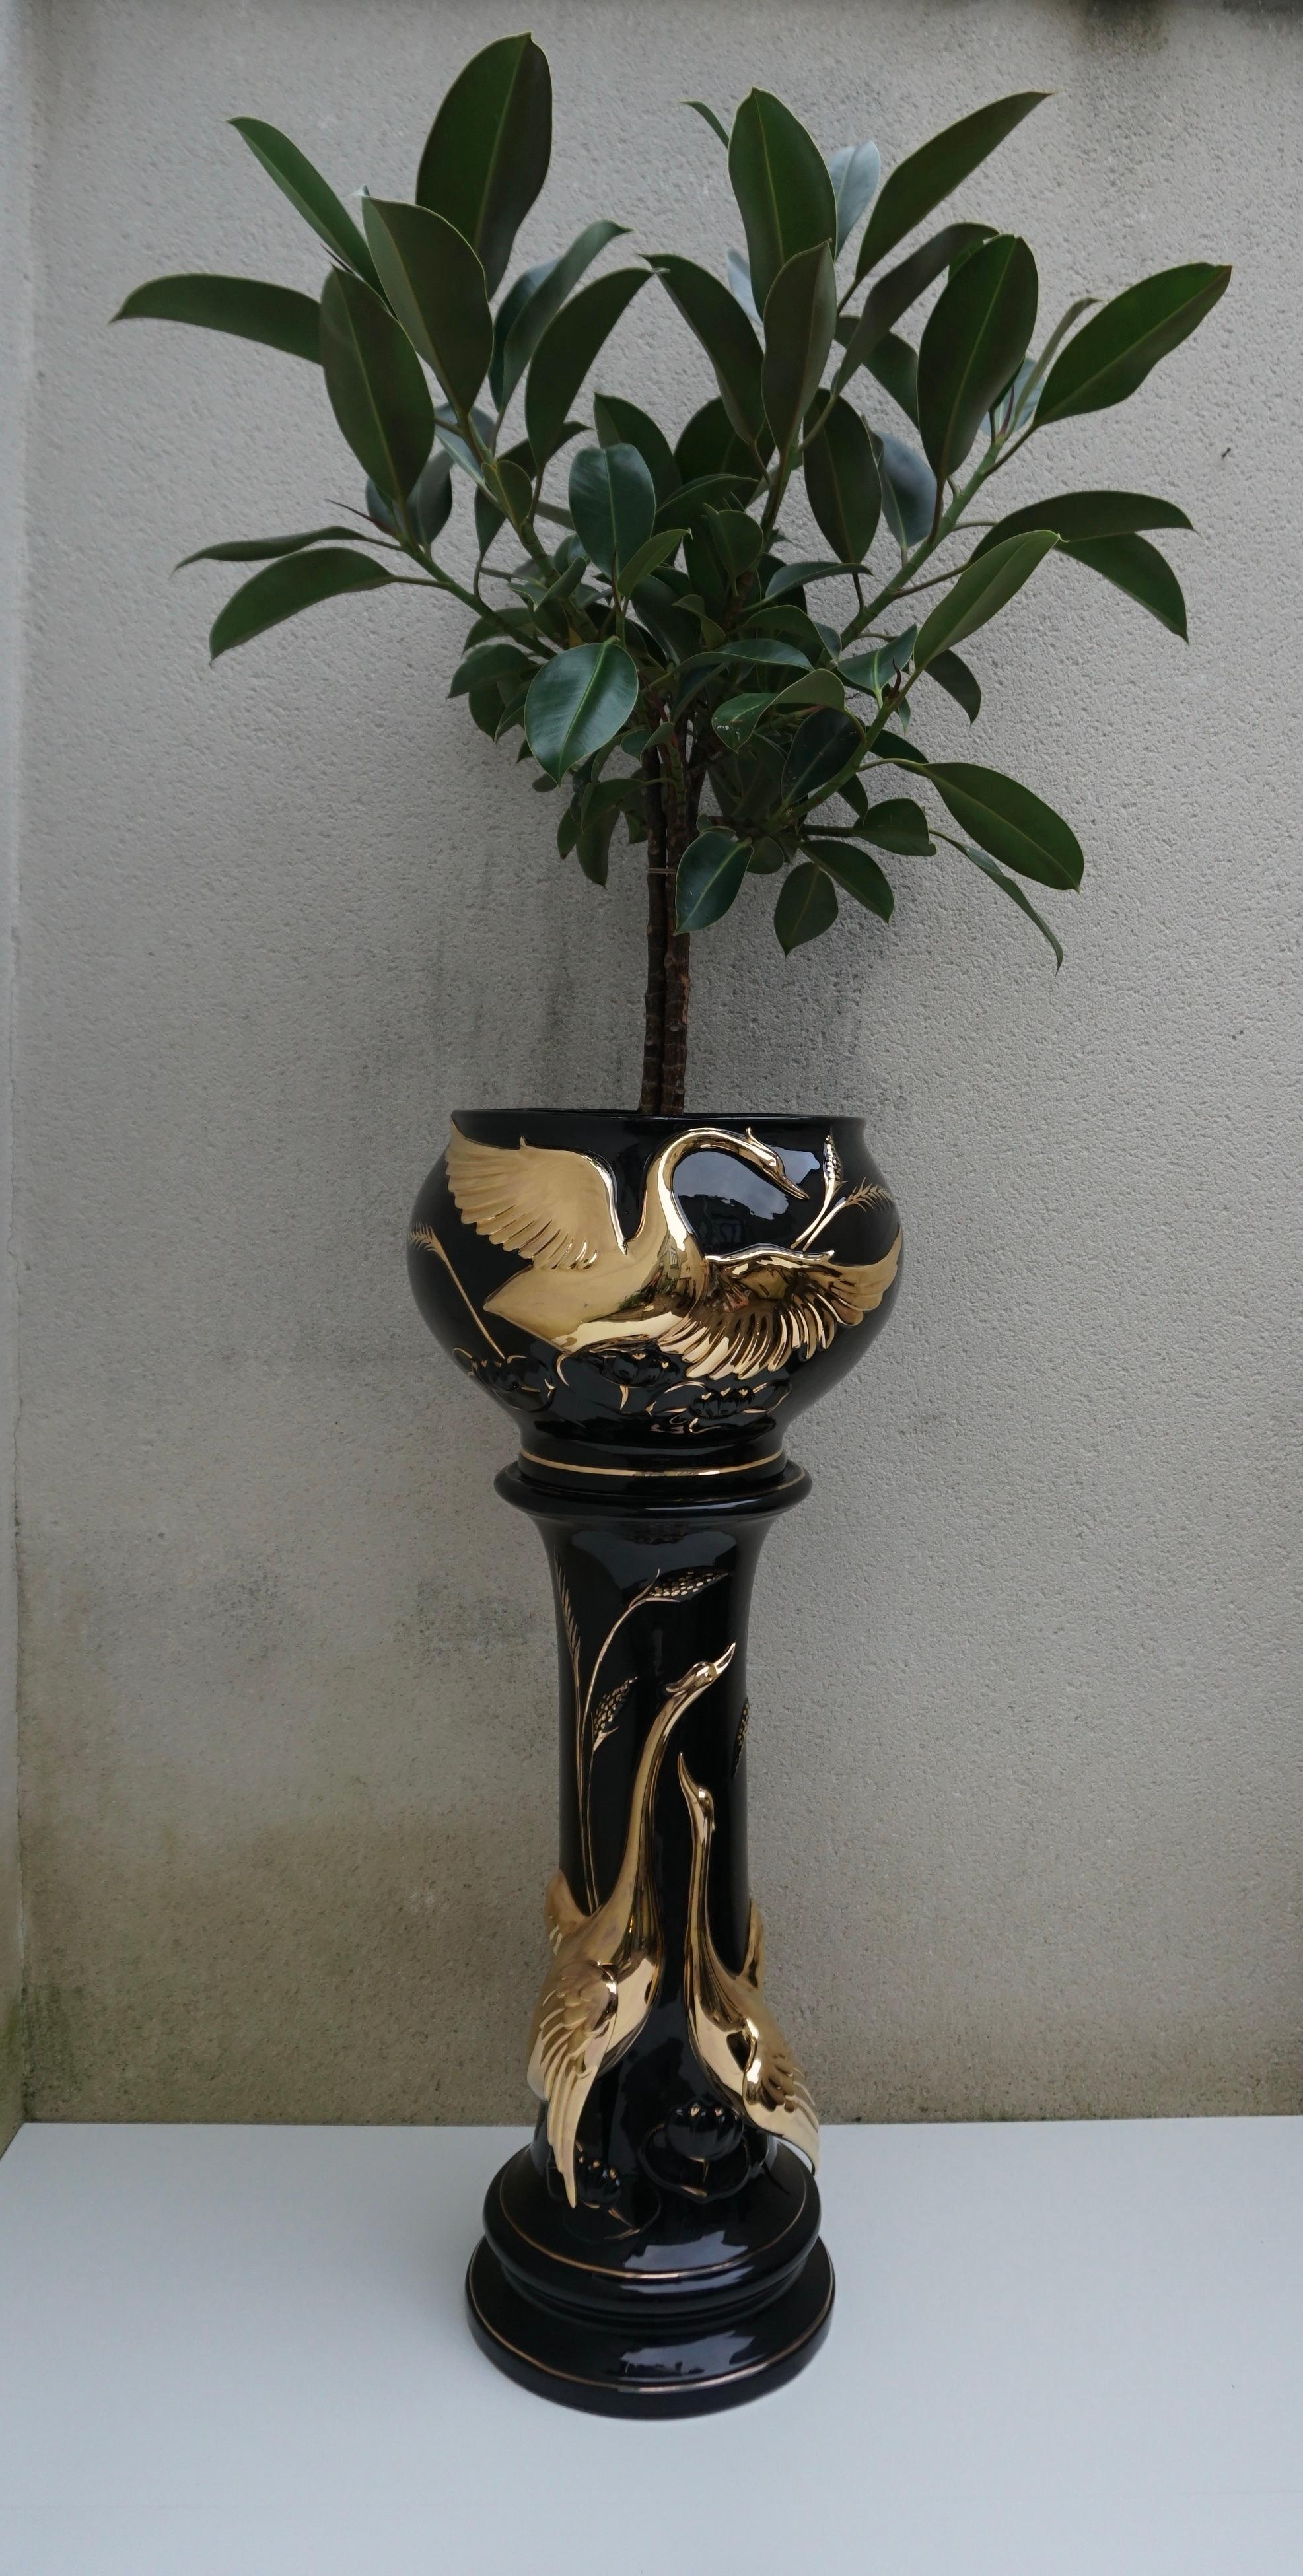 Mid century Italian pedestal plant stand with jardinière and gilded swans. 
Made of plaster, 1970s.

Total height 38.5